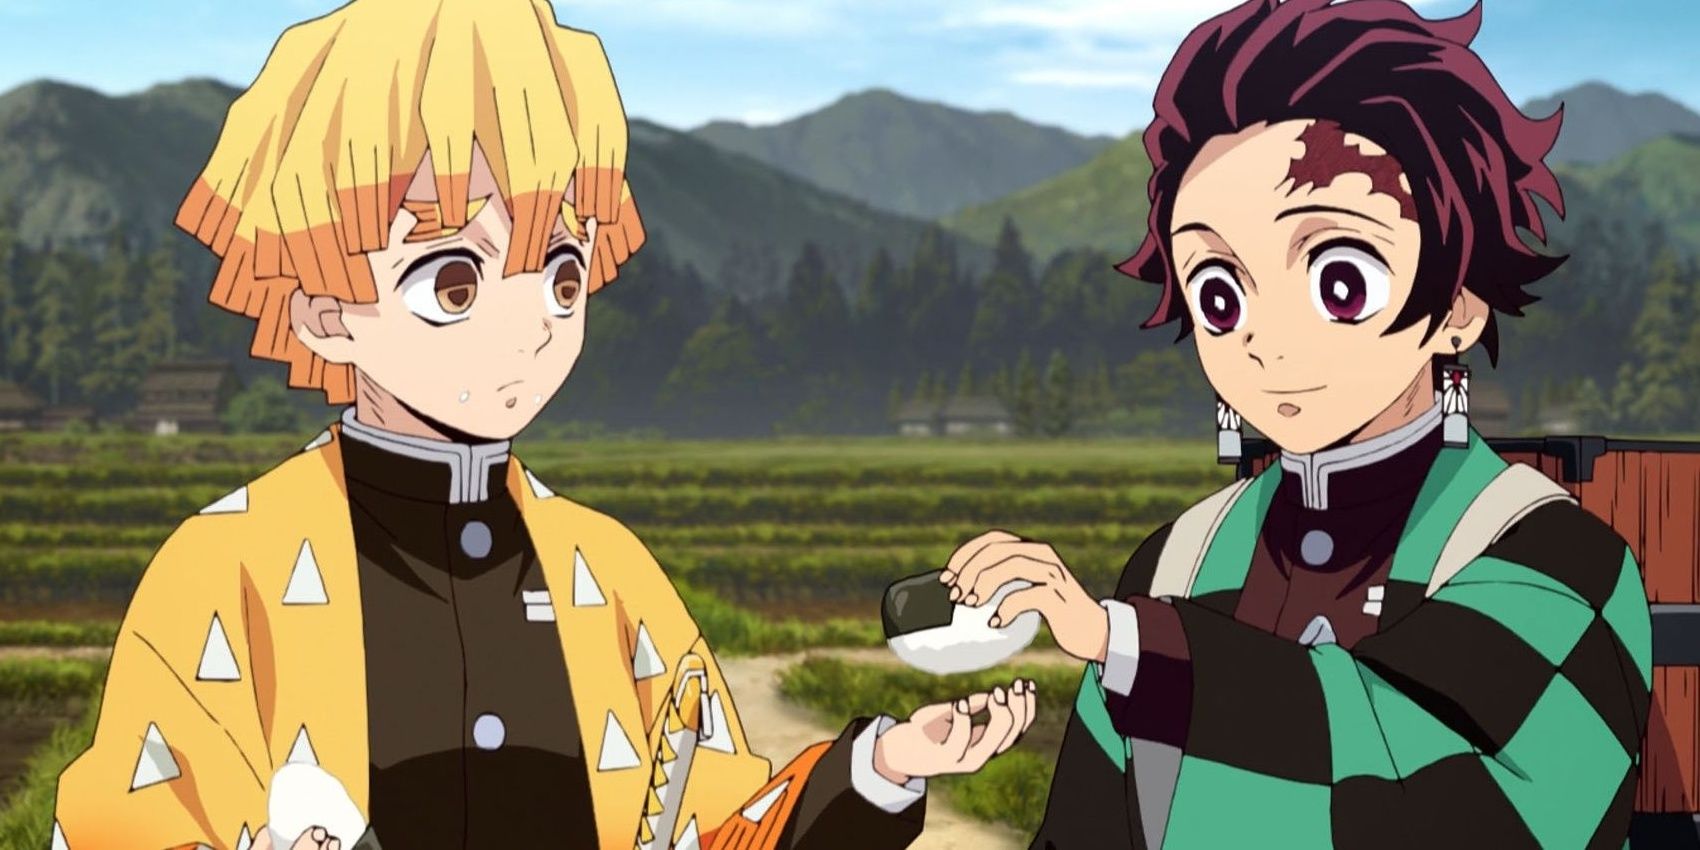 Tanjiro giving Zenitsu a rice ball in front of a field and mountains